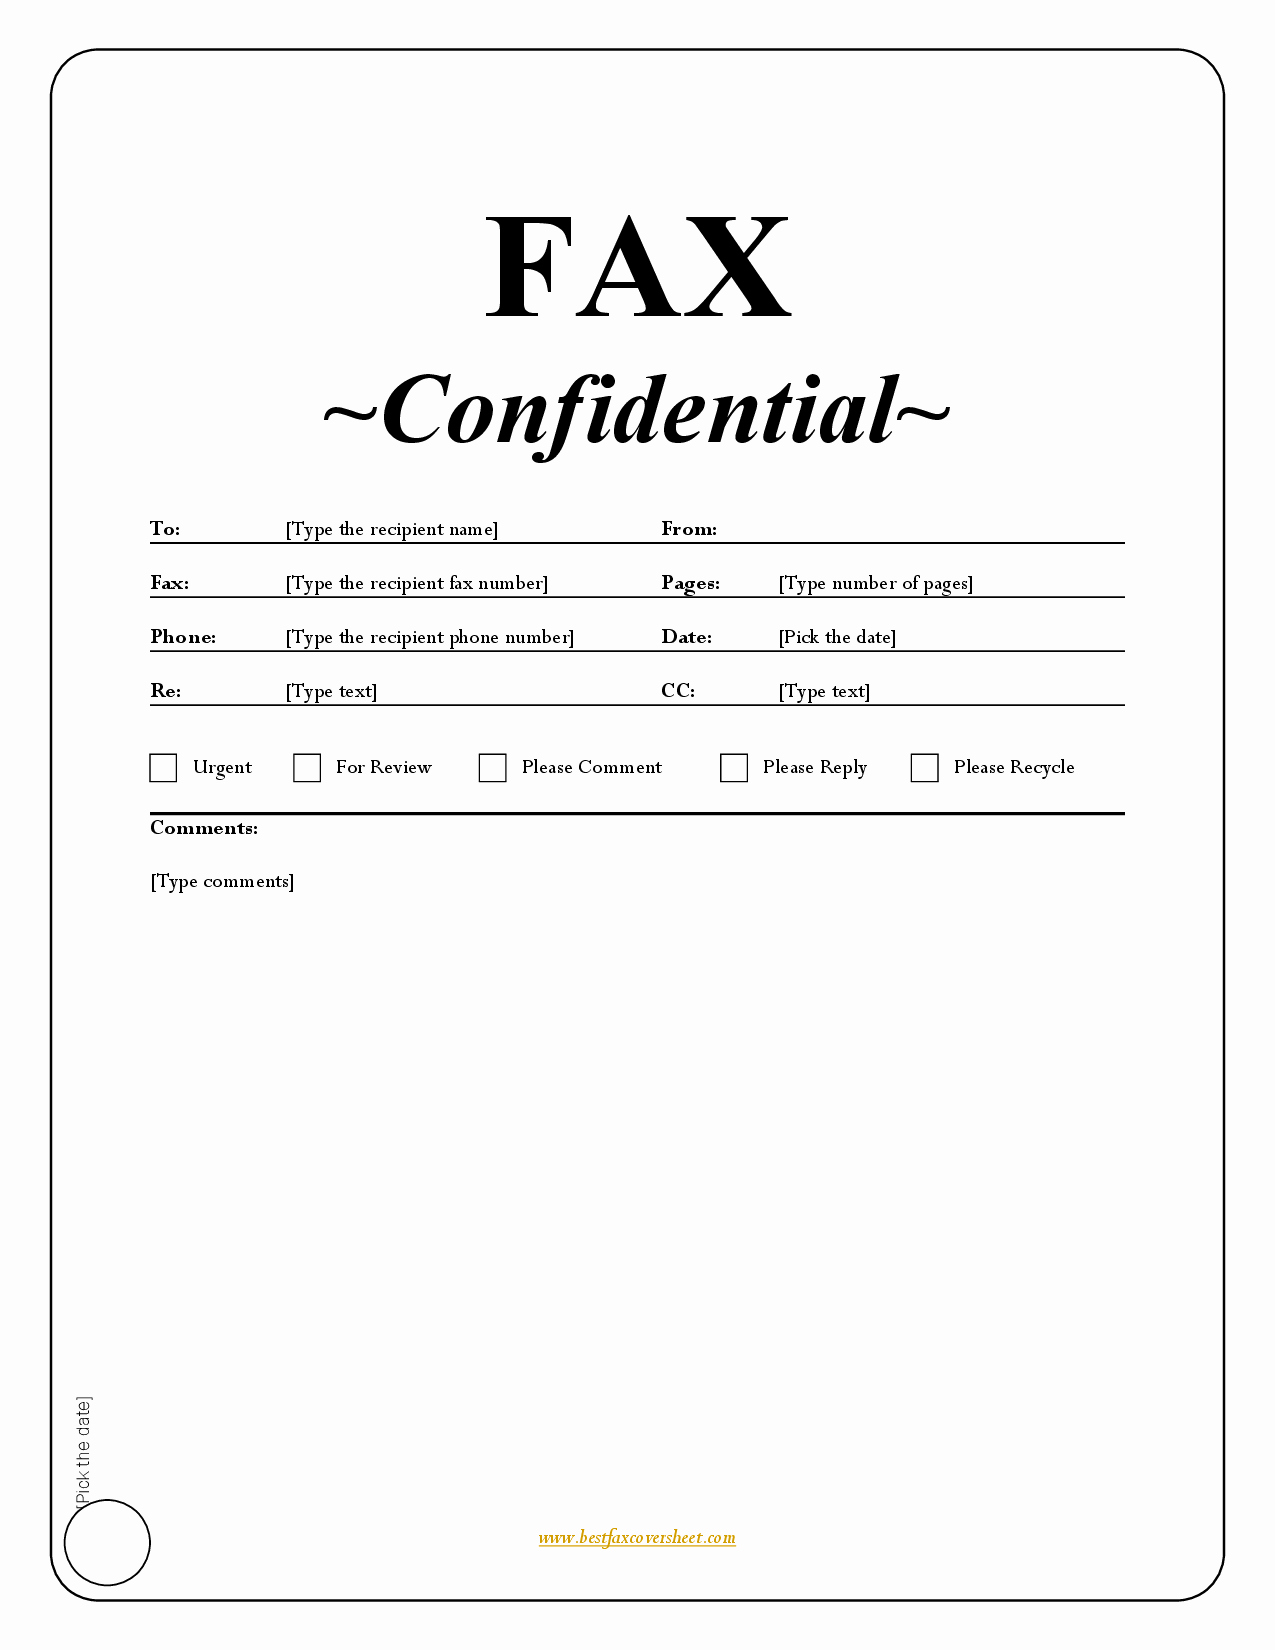 Personal Fax Cover Sheet Pdf Inspirational Printable Fax Cover Sheet with Confidentiality Statement